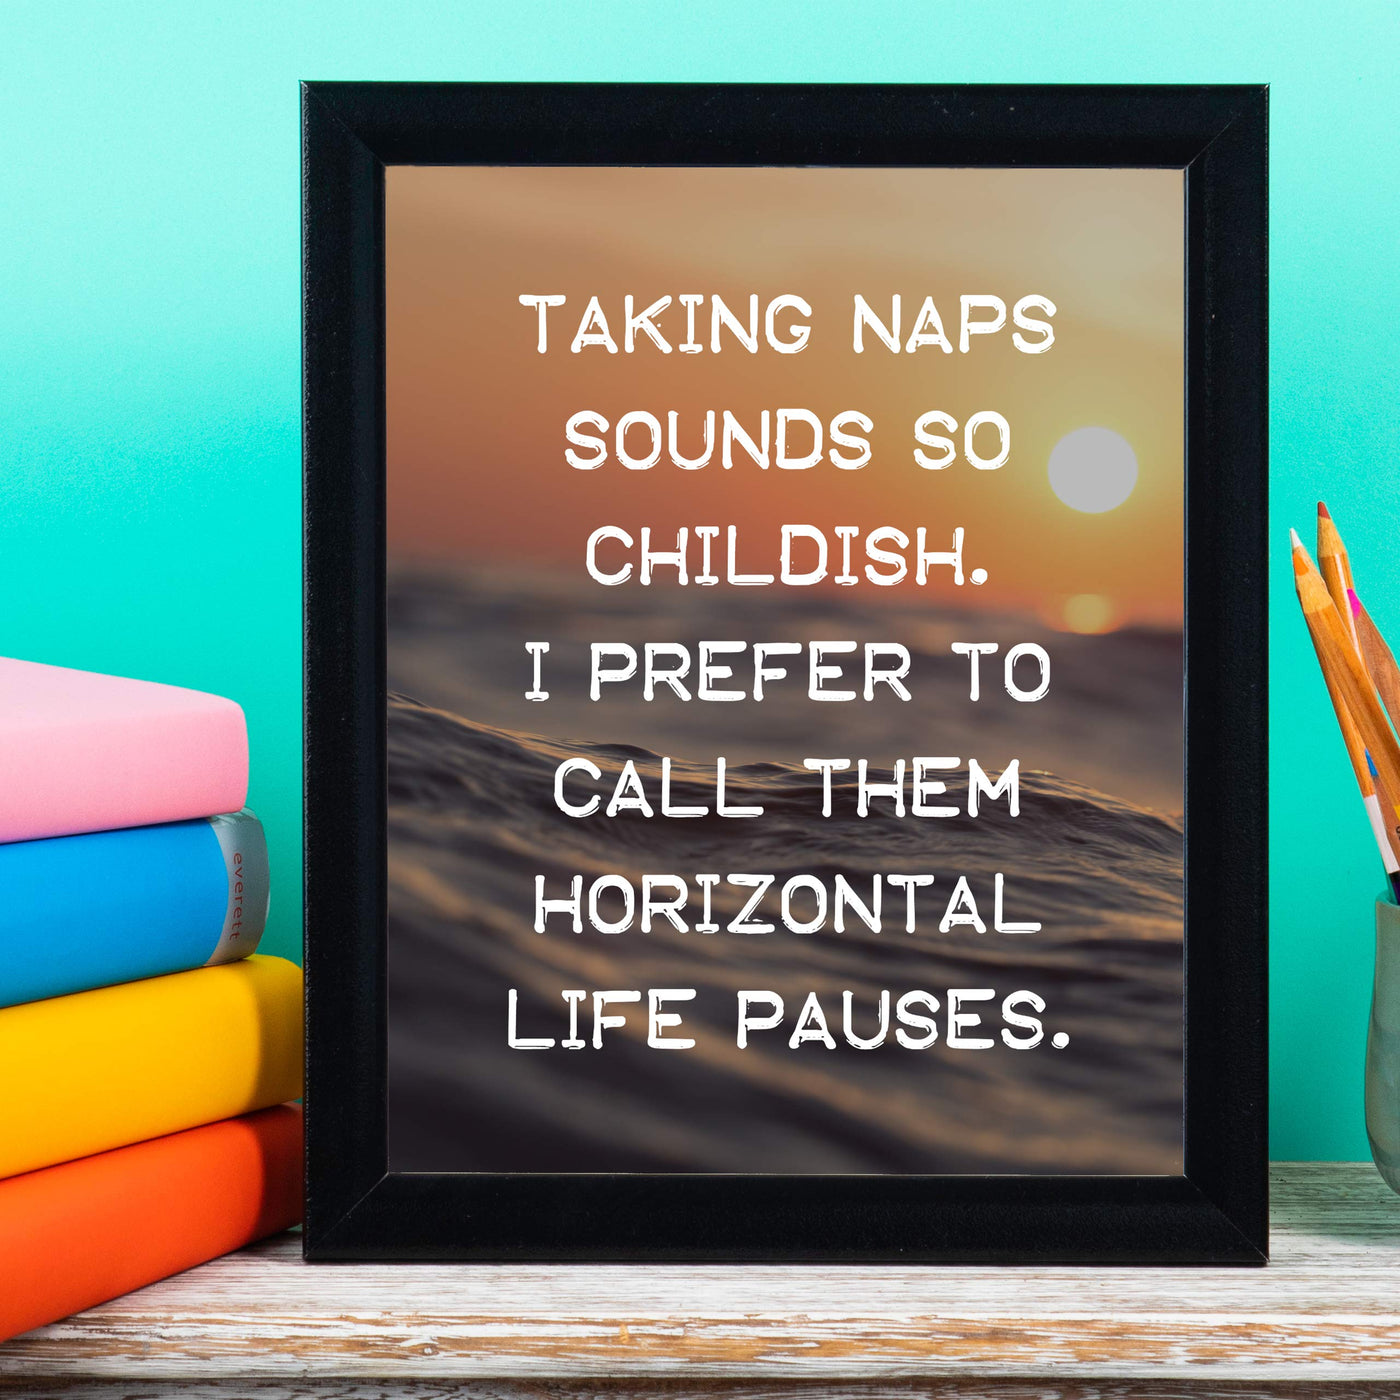 Taking Naps Sounds So Childish Funny Wall Art Sign -8 x 10" Ocean Sunset Poster Print-Ready to Frame. Humorous Home-Office-Bar-Shop-Cave Decor. Great Novelty Sign & Fun Gift for Sarcastic Friends!